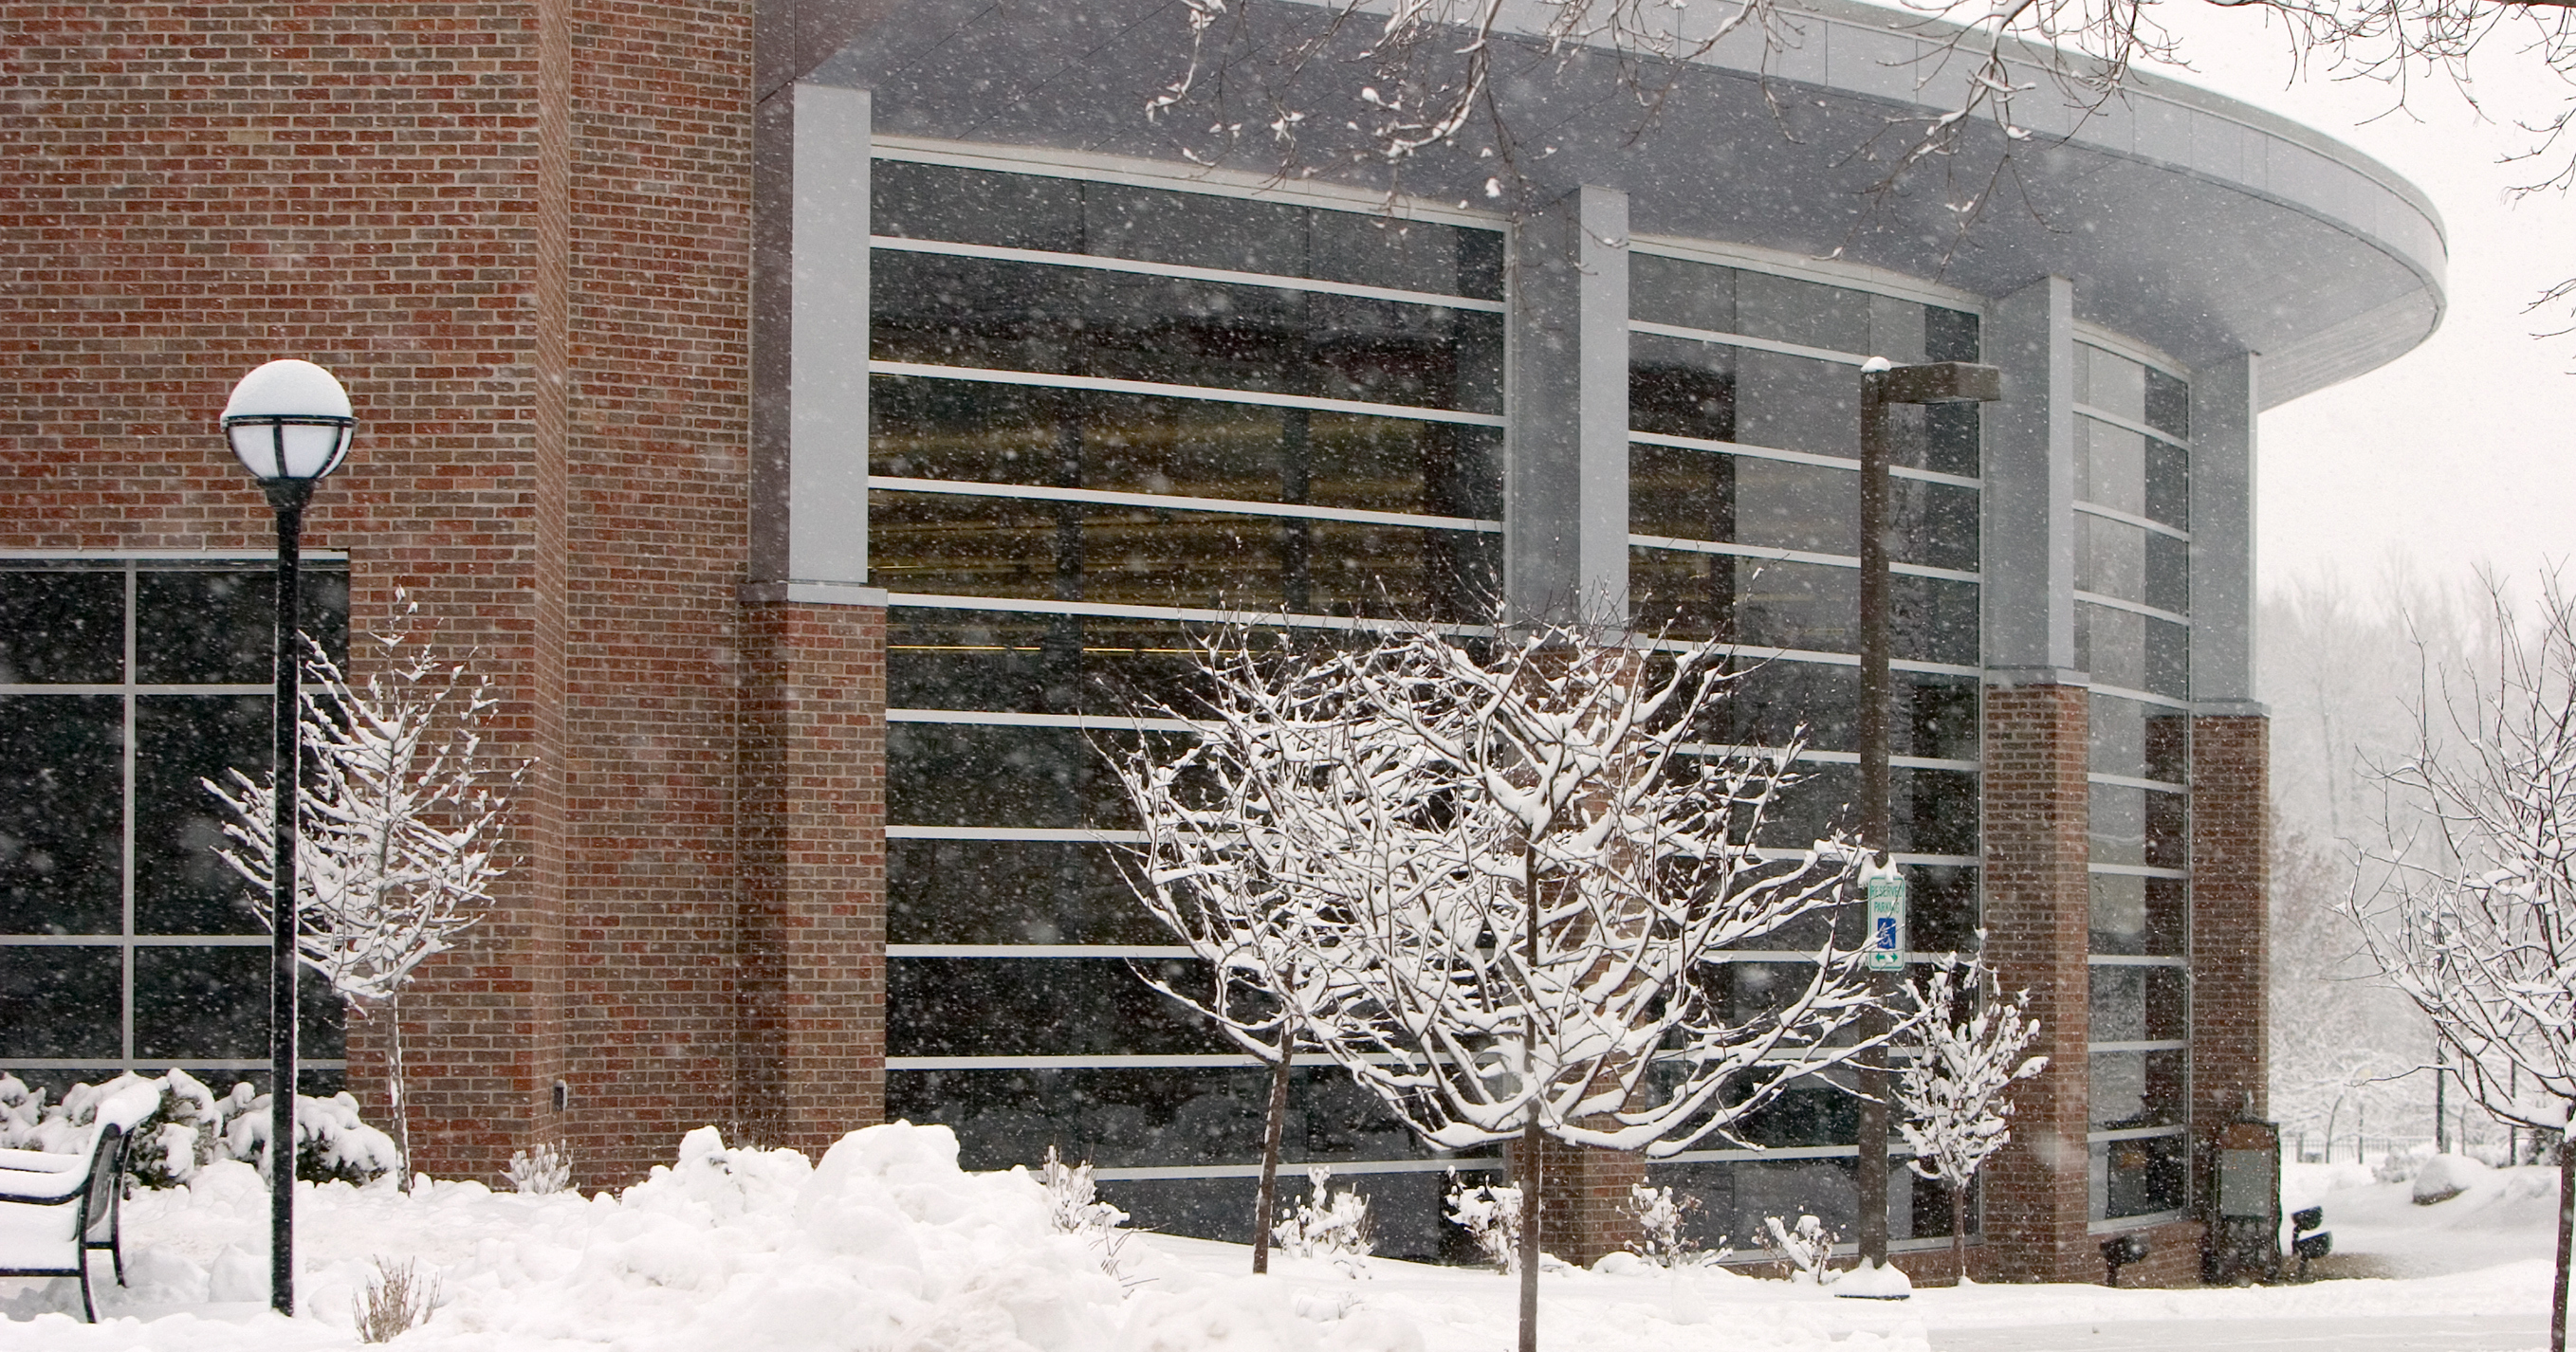 A university building in winter